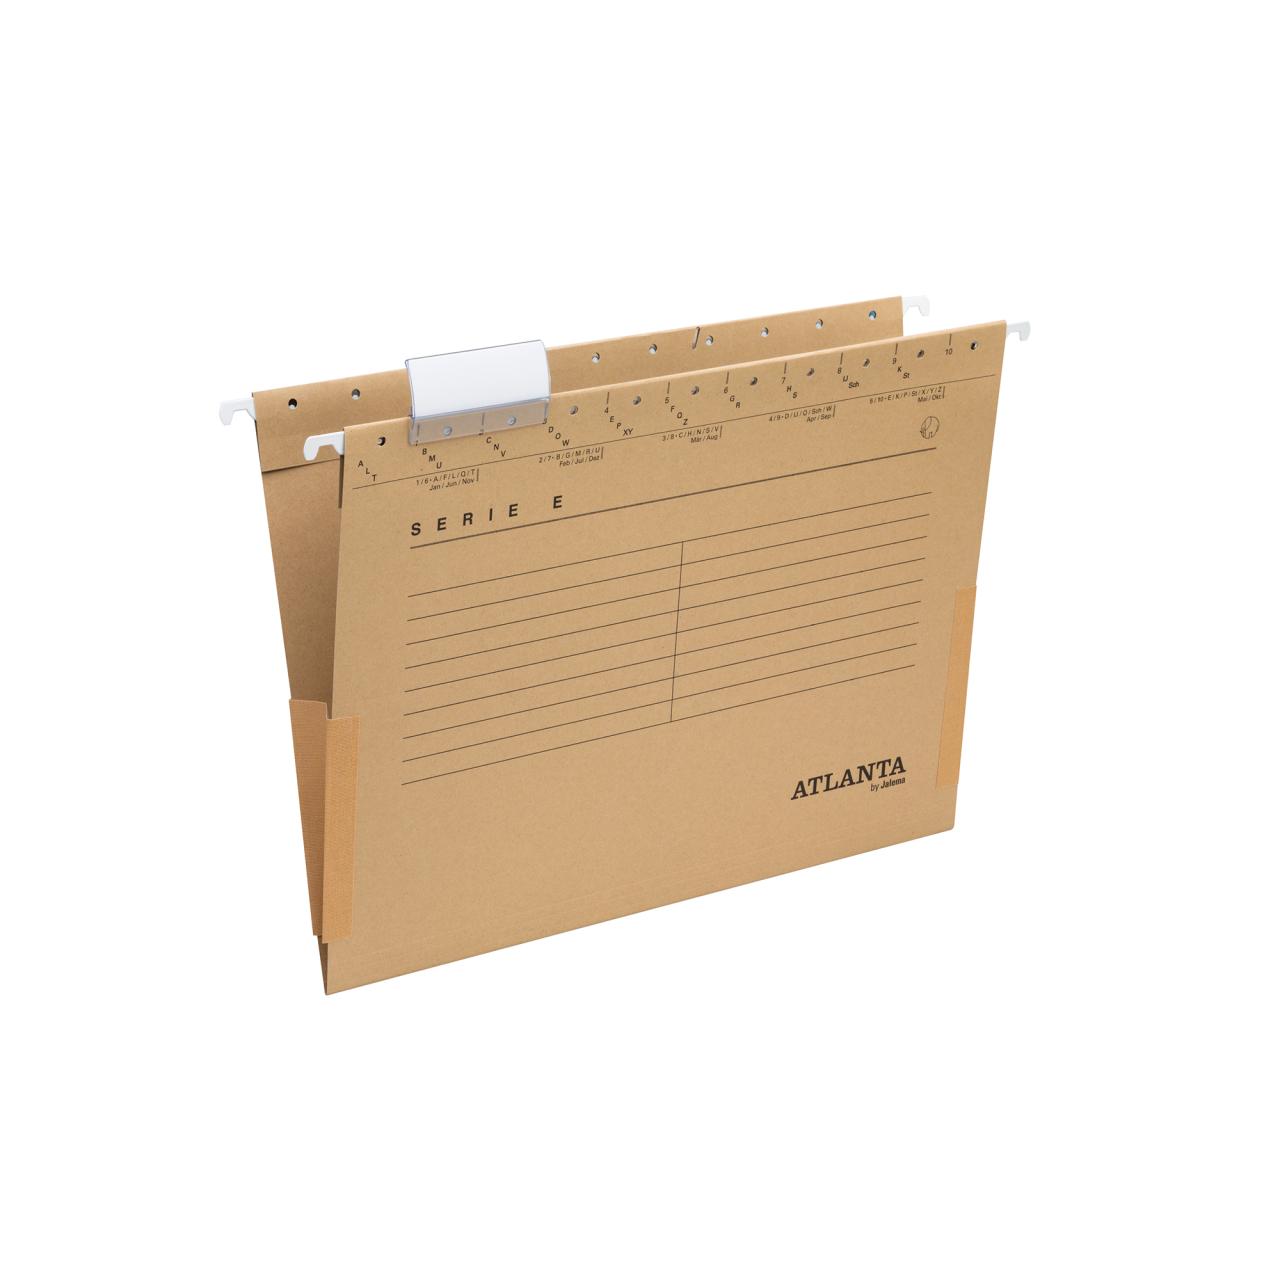 Serie-E Suspension File with Gussets, A4, 100% recycled cardboard, FSC®